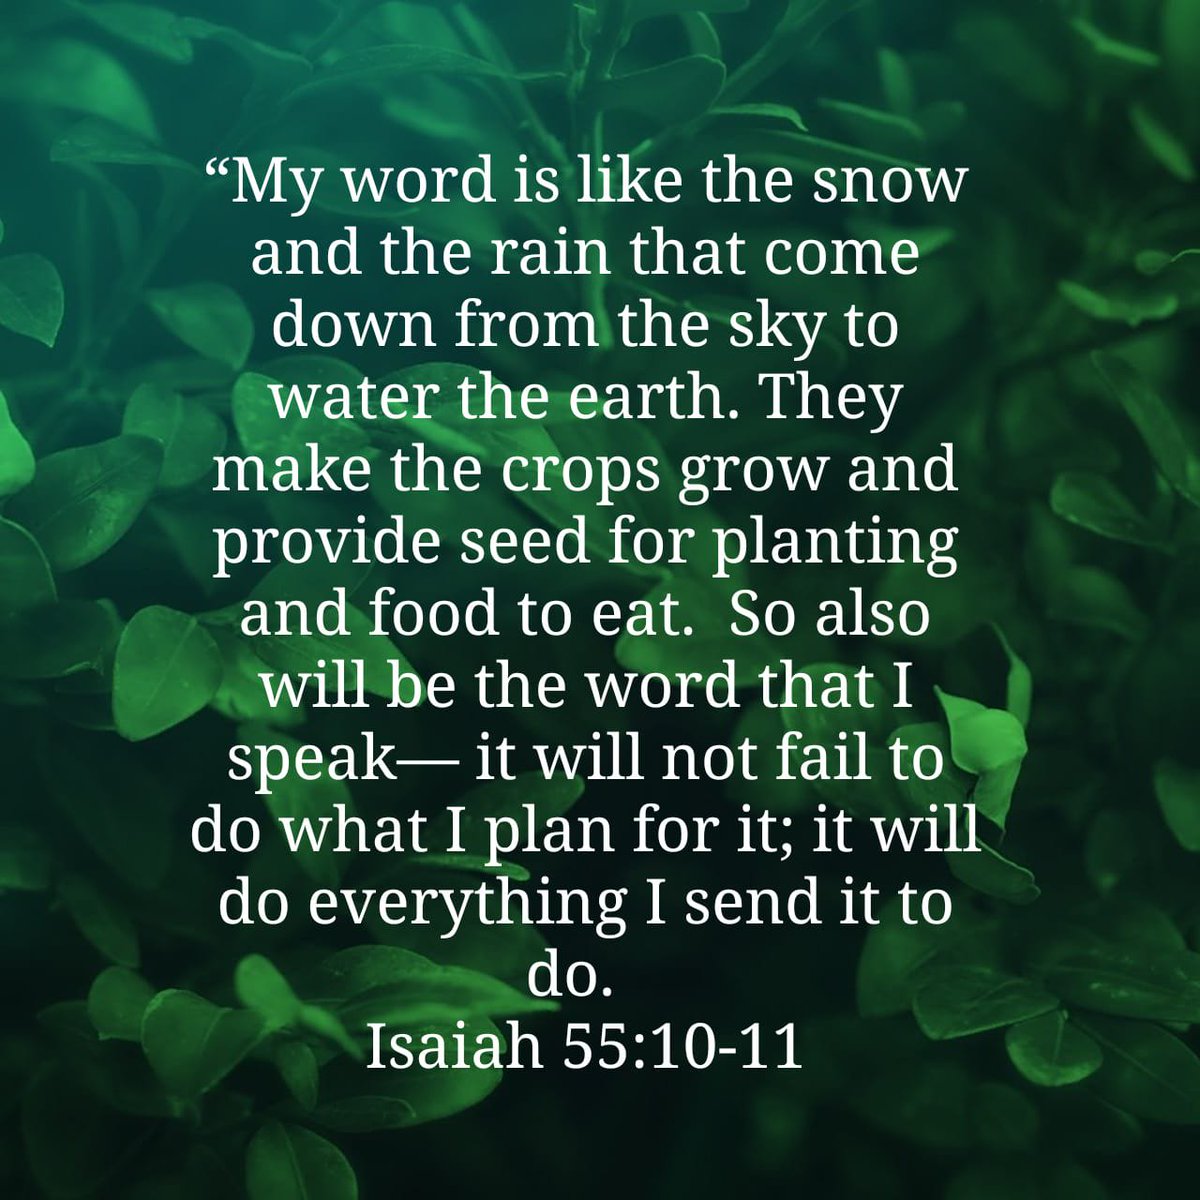 “My word is like the snow and the rain that come down from the sky to water the earth. They mak…
https://t.co/TyMWDmwEfv #BibleVerses #JesusIsKing #JesusSaves #JesusIsComing https://t.co/omhALVJtqn